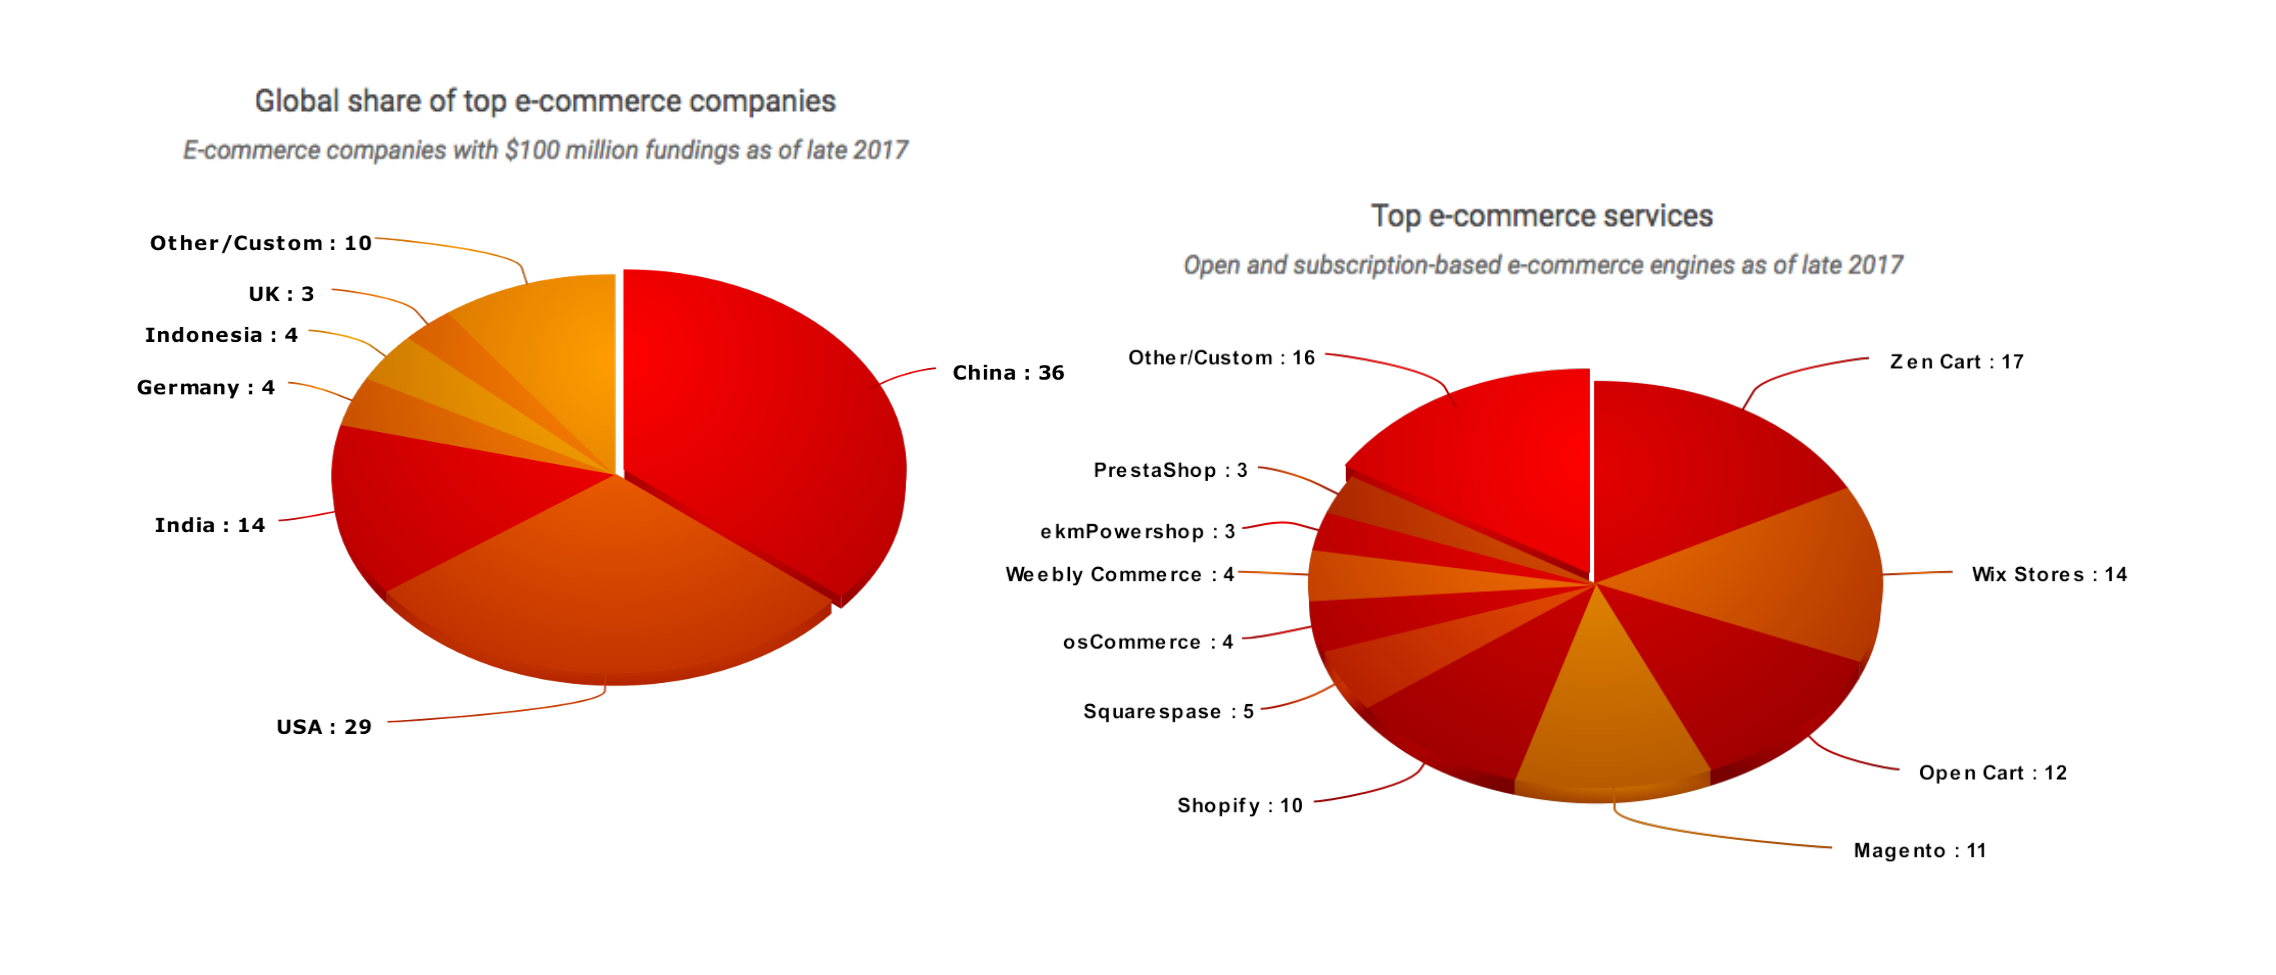 Global share of top e-commerce companies